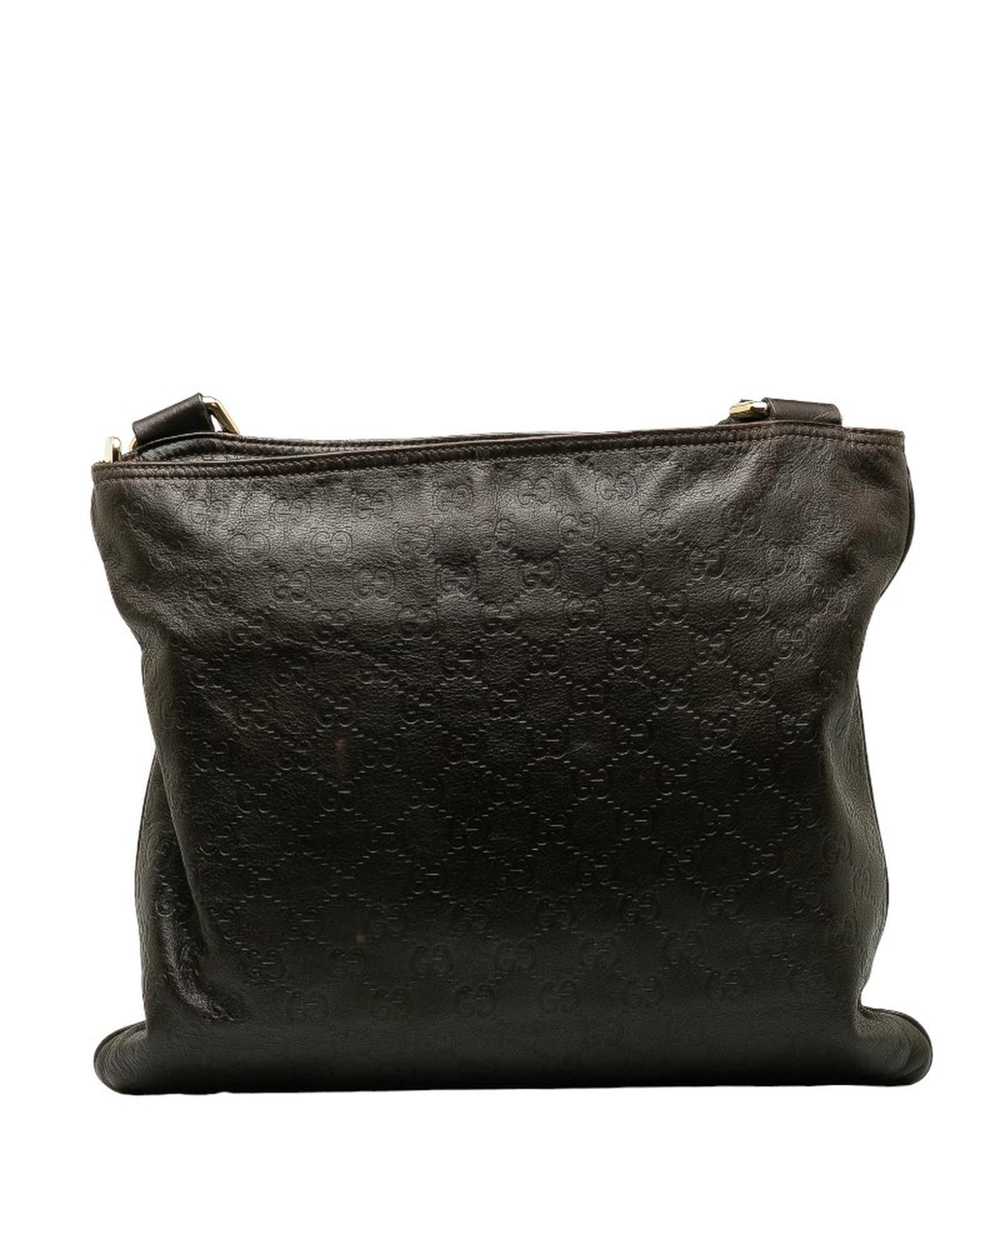 Gucci Brown Guccissima Messenger Bag in AB Condit… - image 3